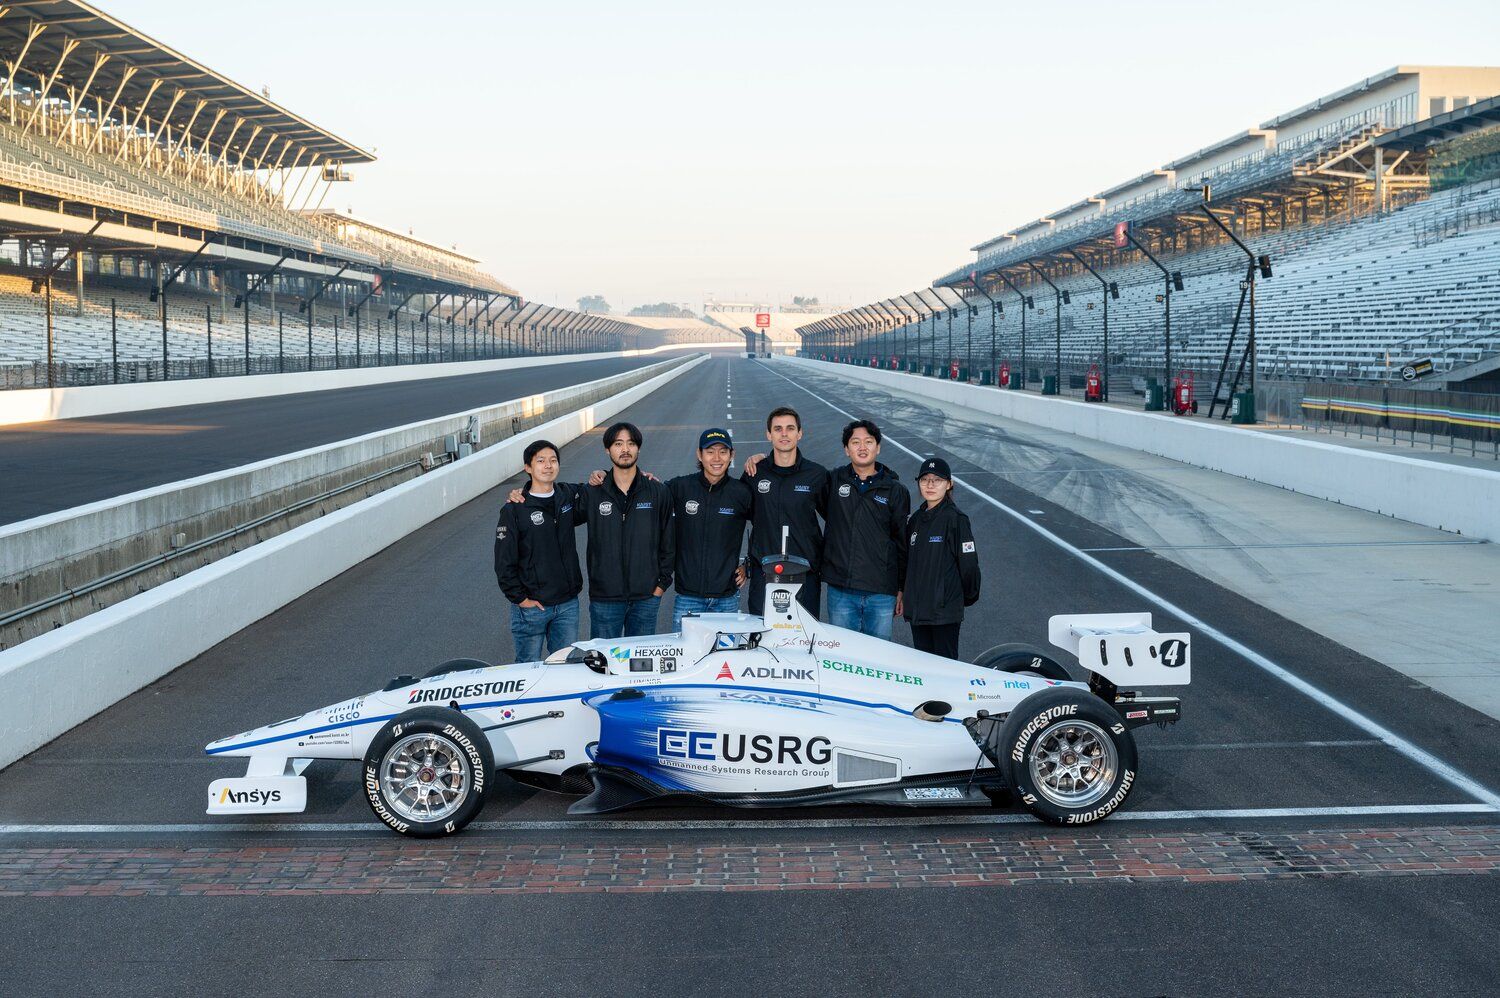 UH competes in first ever international driverless car racing